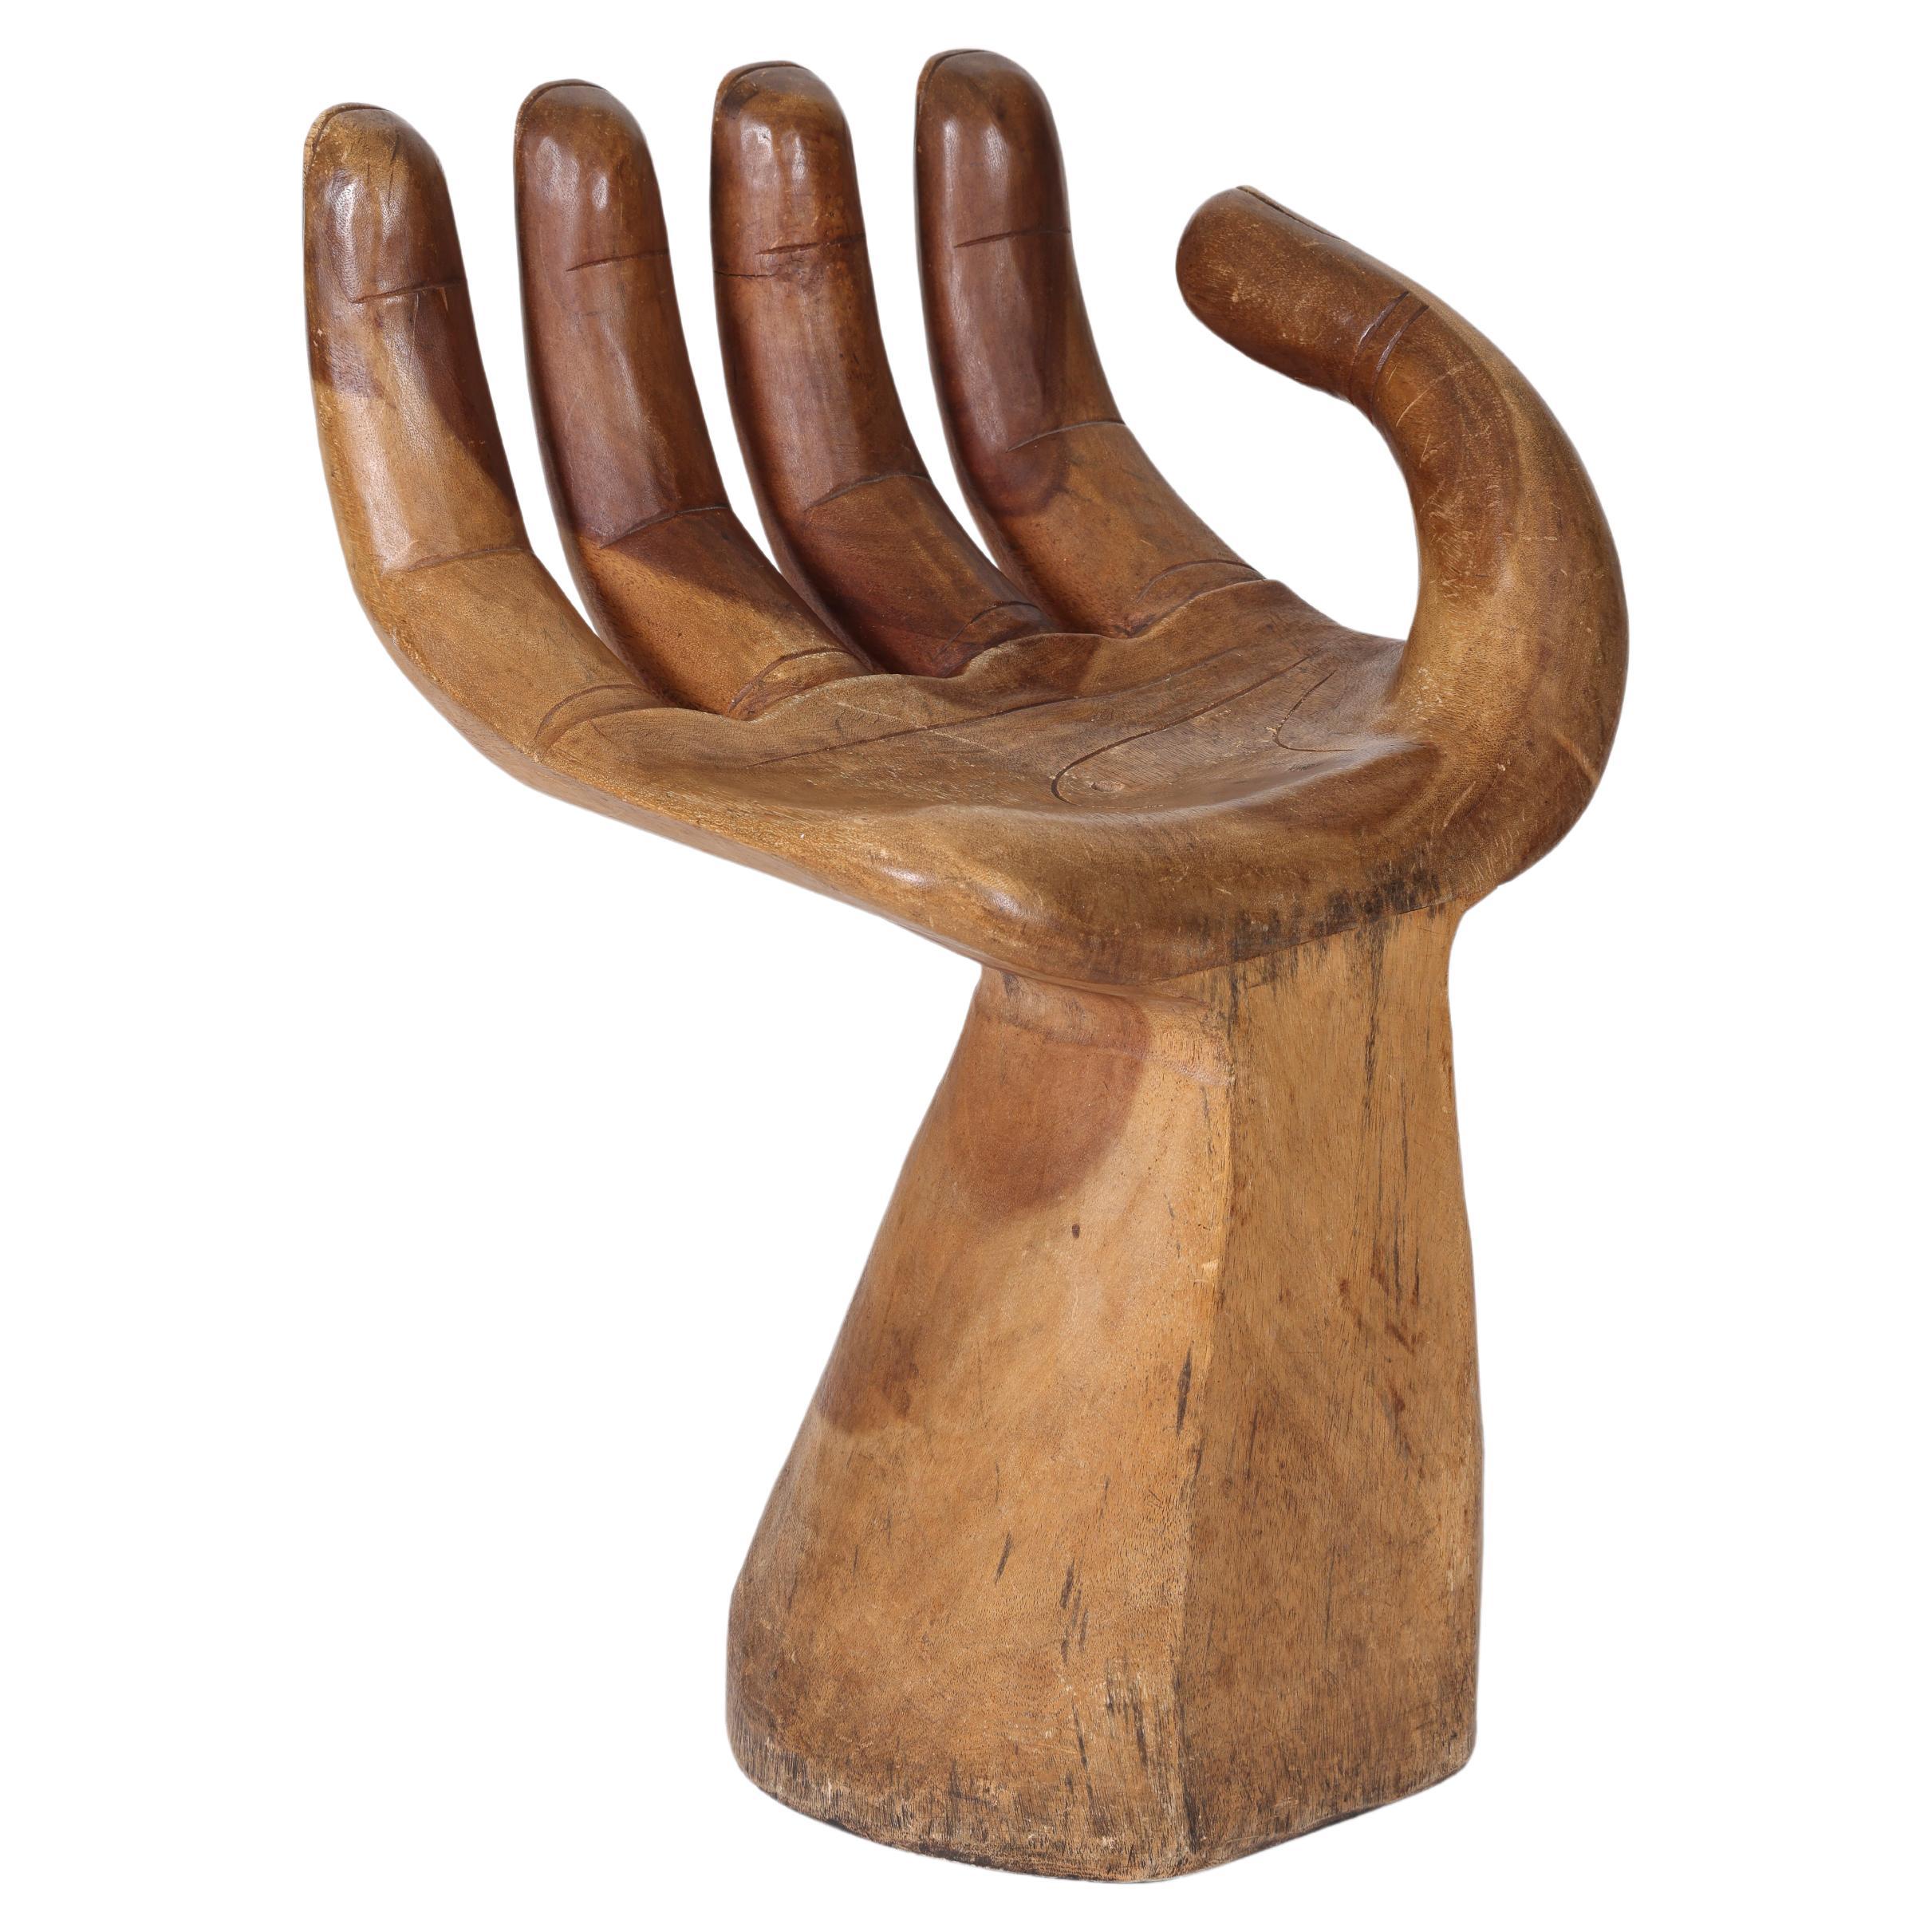 Solid Wood Hand Chair